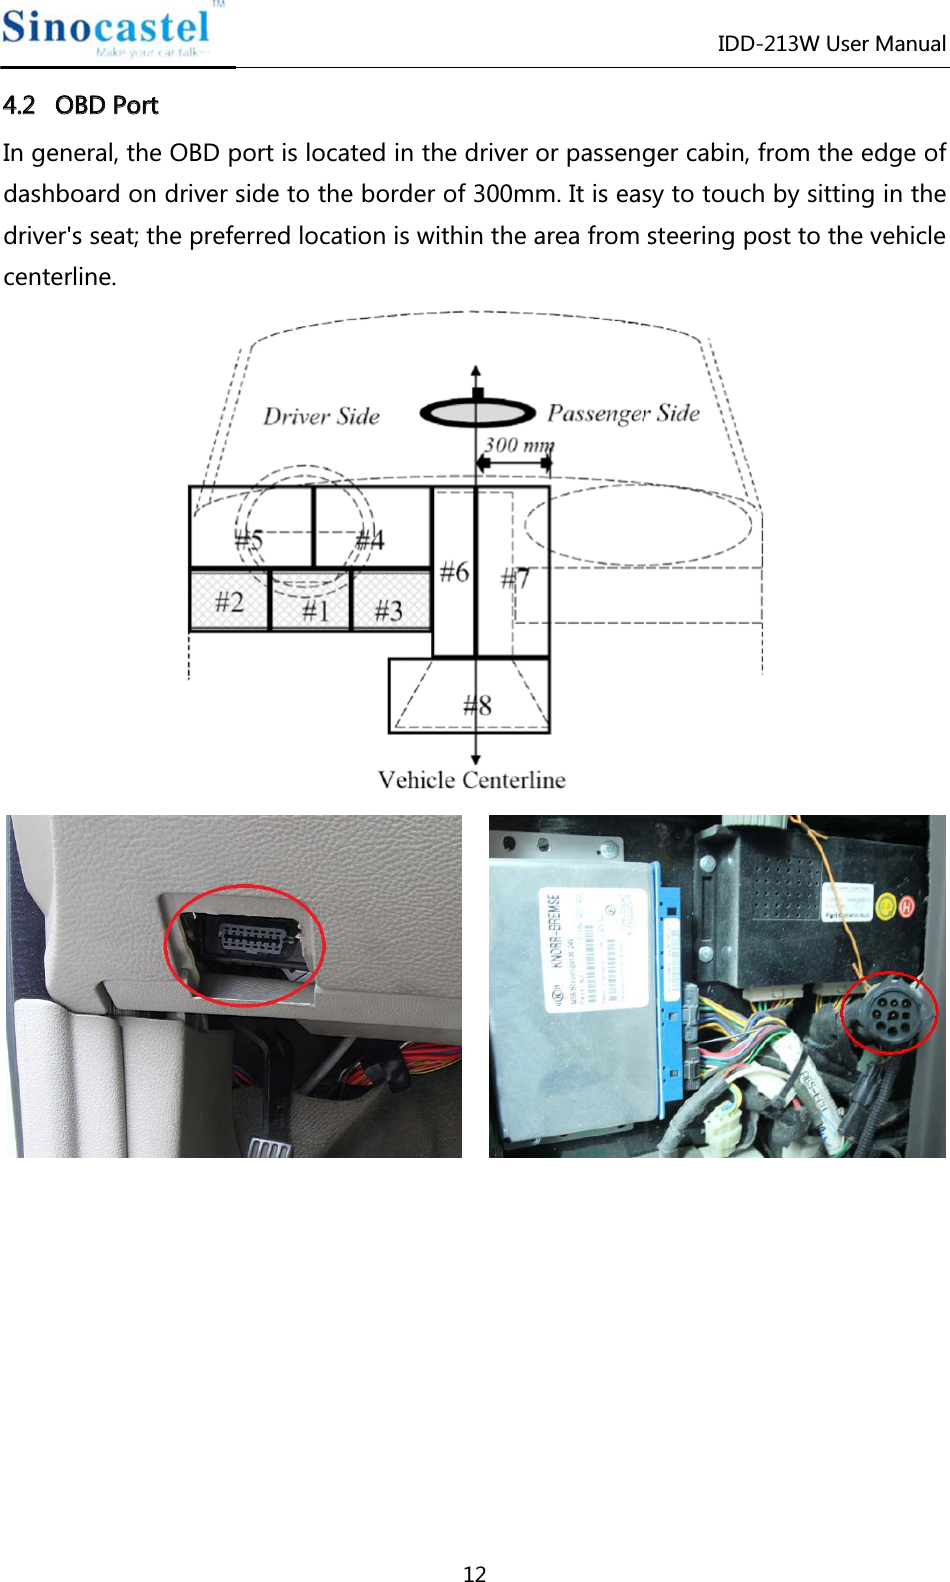 IDD-213W User Manual 12 44..22   OOBBDD  PPoorrtt  In general, the OBD port is located in the driver or passenger cabin, from the edge of dashboard on driver side to the border of 300mm. It is easy to touch by sitting in the driver&apos;s seat; the preferred location is within the area from steering post to the vehicle centerline.               